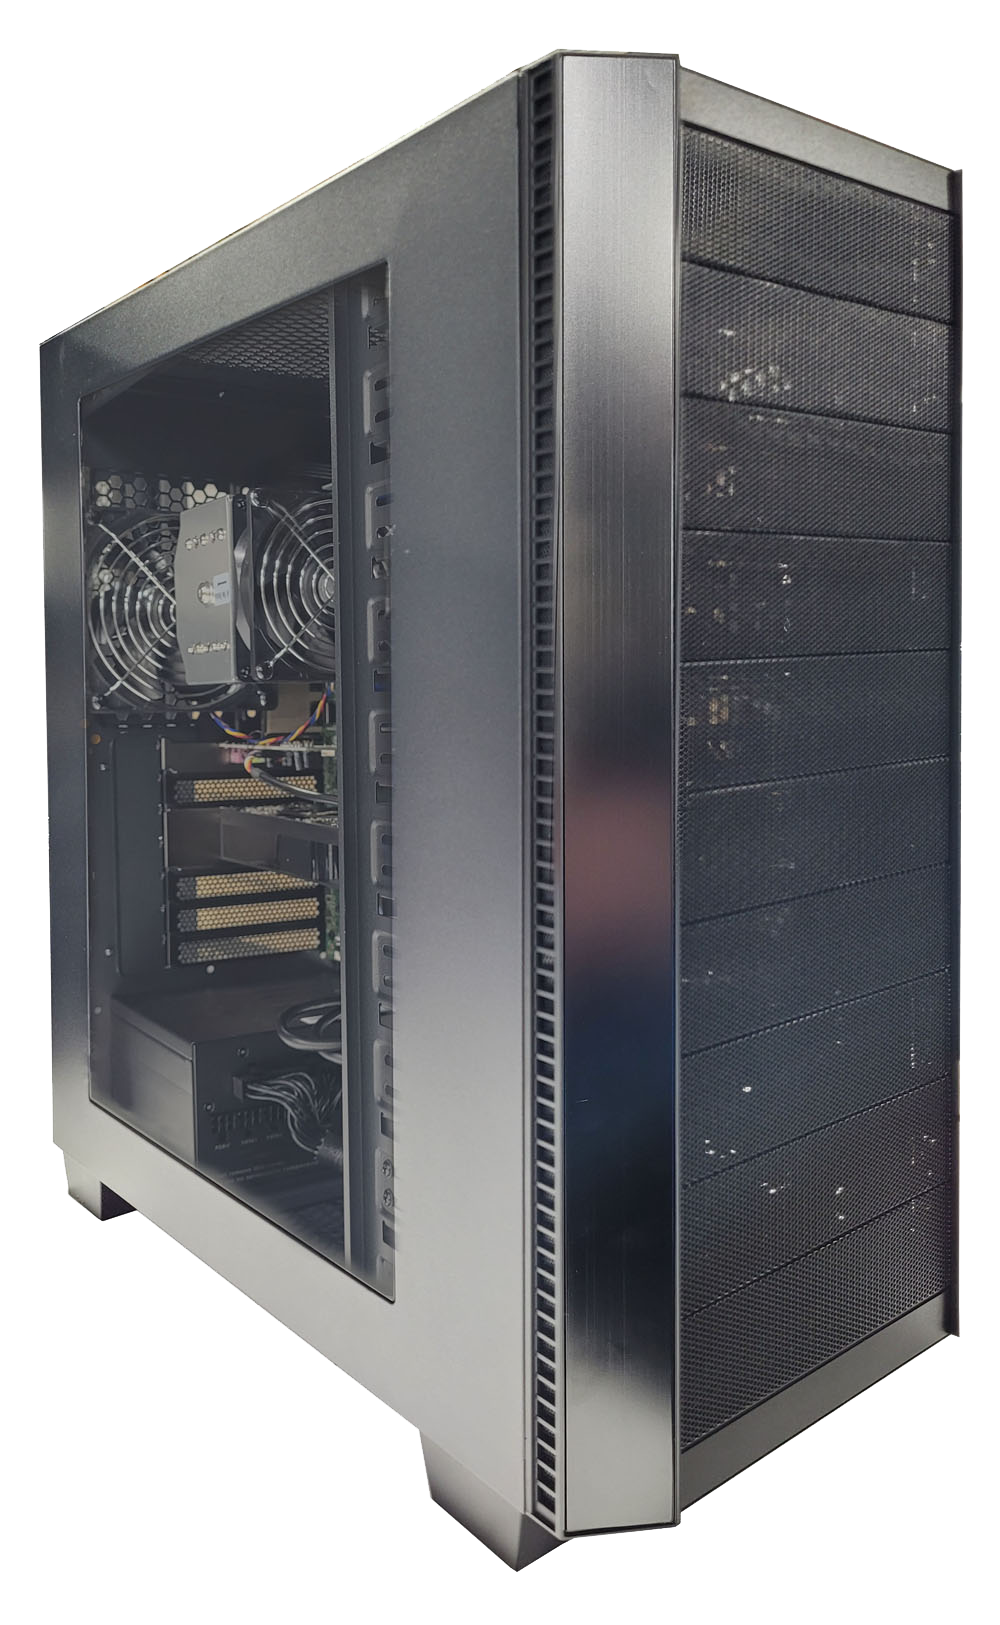 A mid-size black computer tower with a side panel revealing internal components, including cooling fans and various installed hardware, meets the rigorous standards set by GSA for high-performance computing solutions.